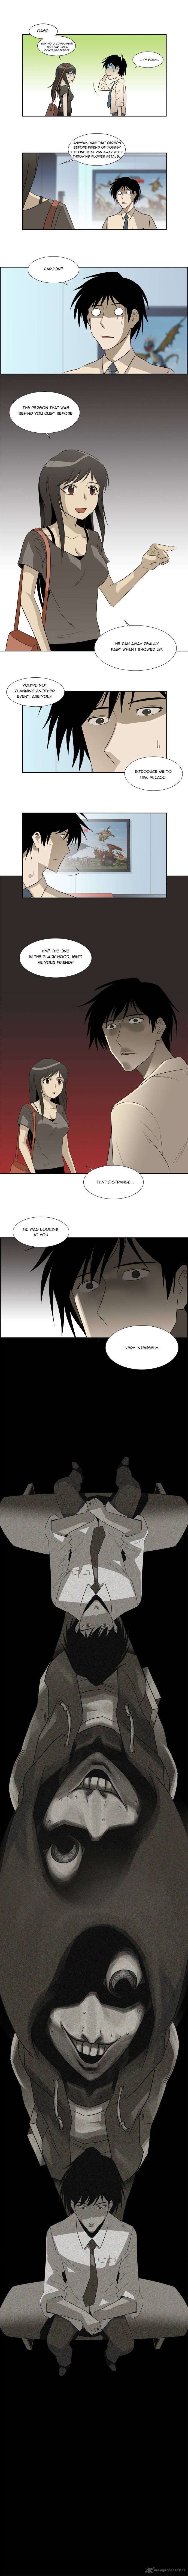 Melo Holic Chapter 16 Page 6